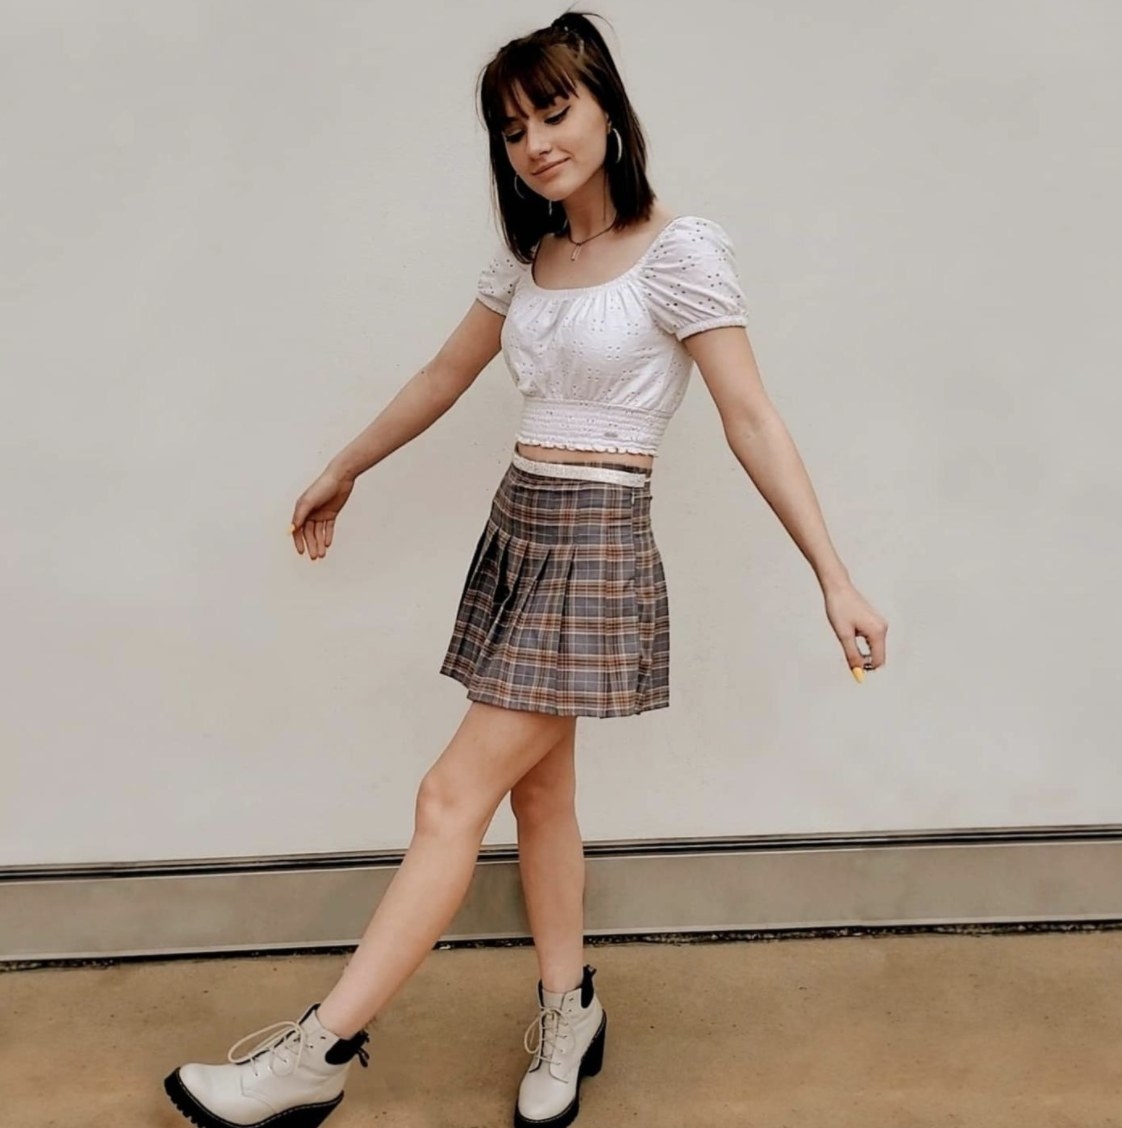 A reviewer wearing a white top and pleated plaid skirt